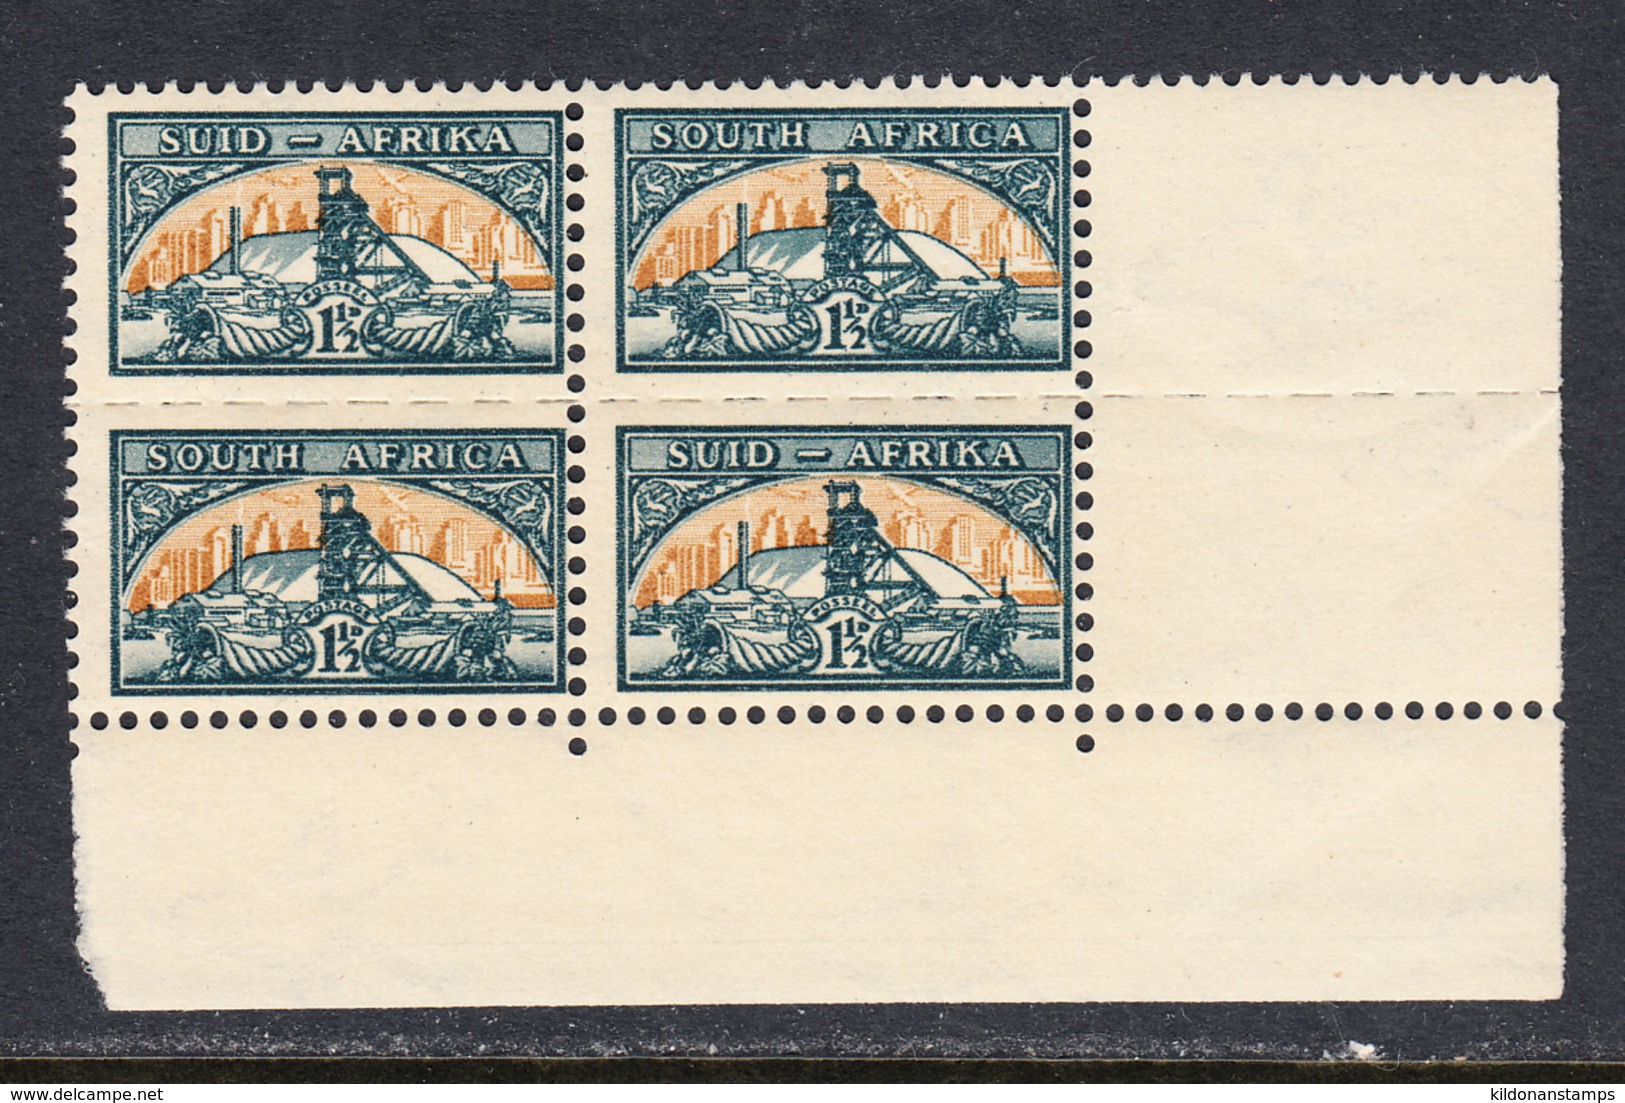 South Africa 1948 Gold Mining, Mint No Hinge, Pair, Sc# 107, SG 87 - Unused Stamps